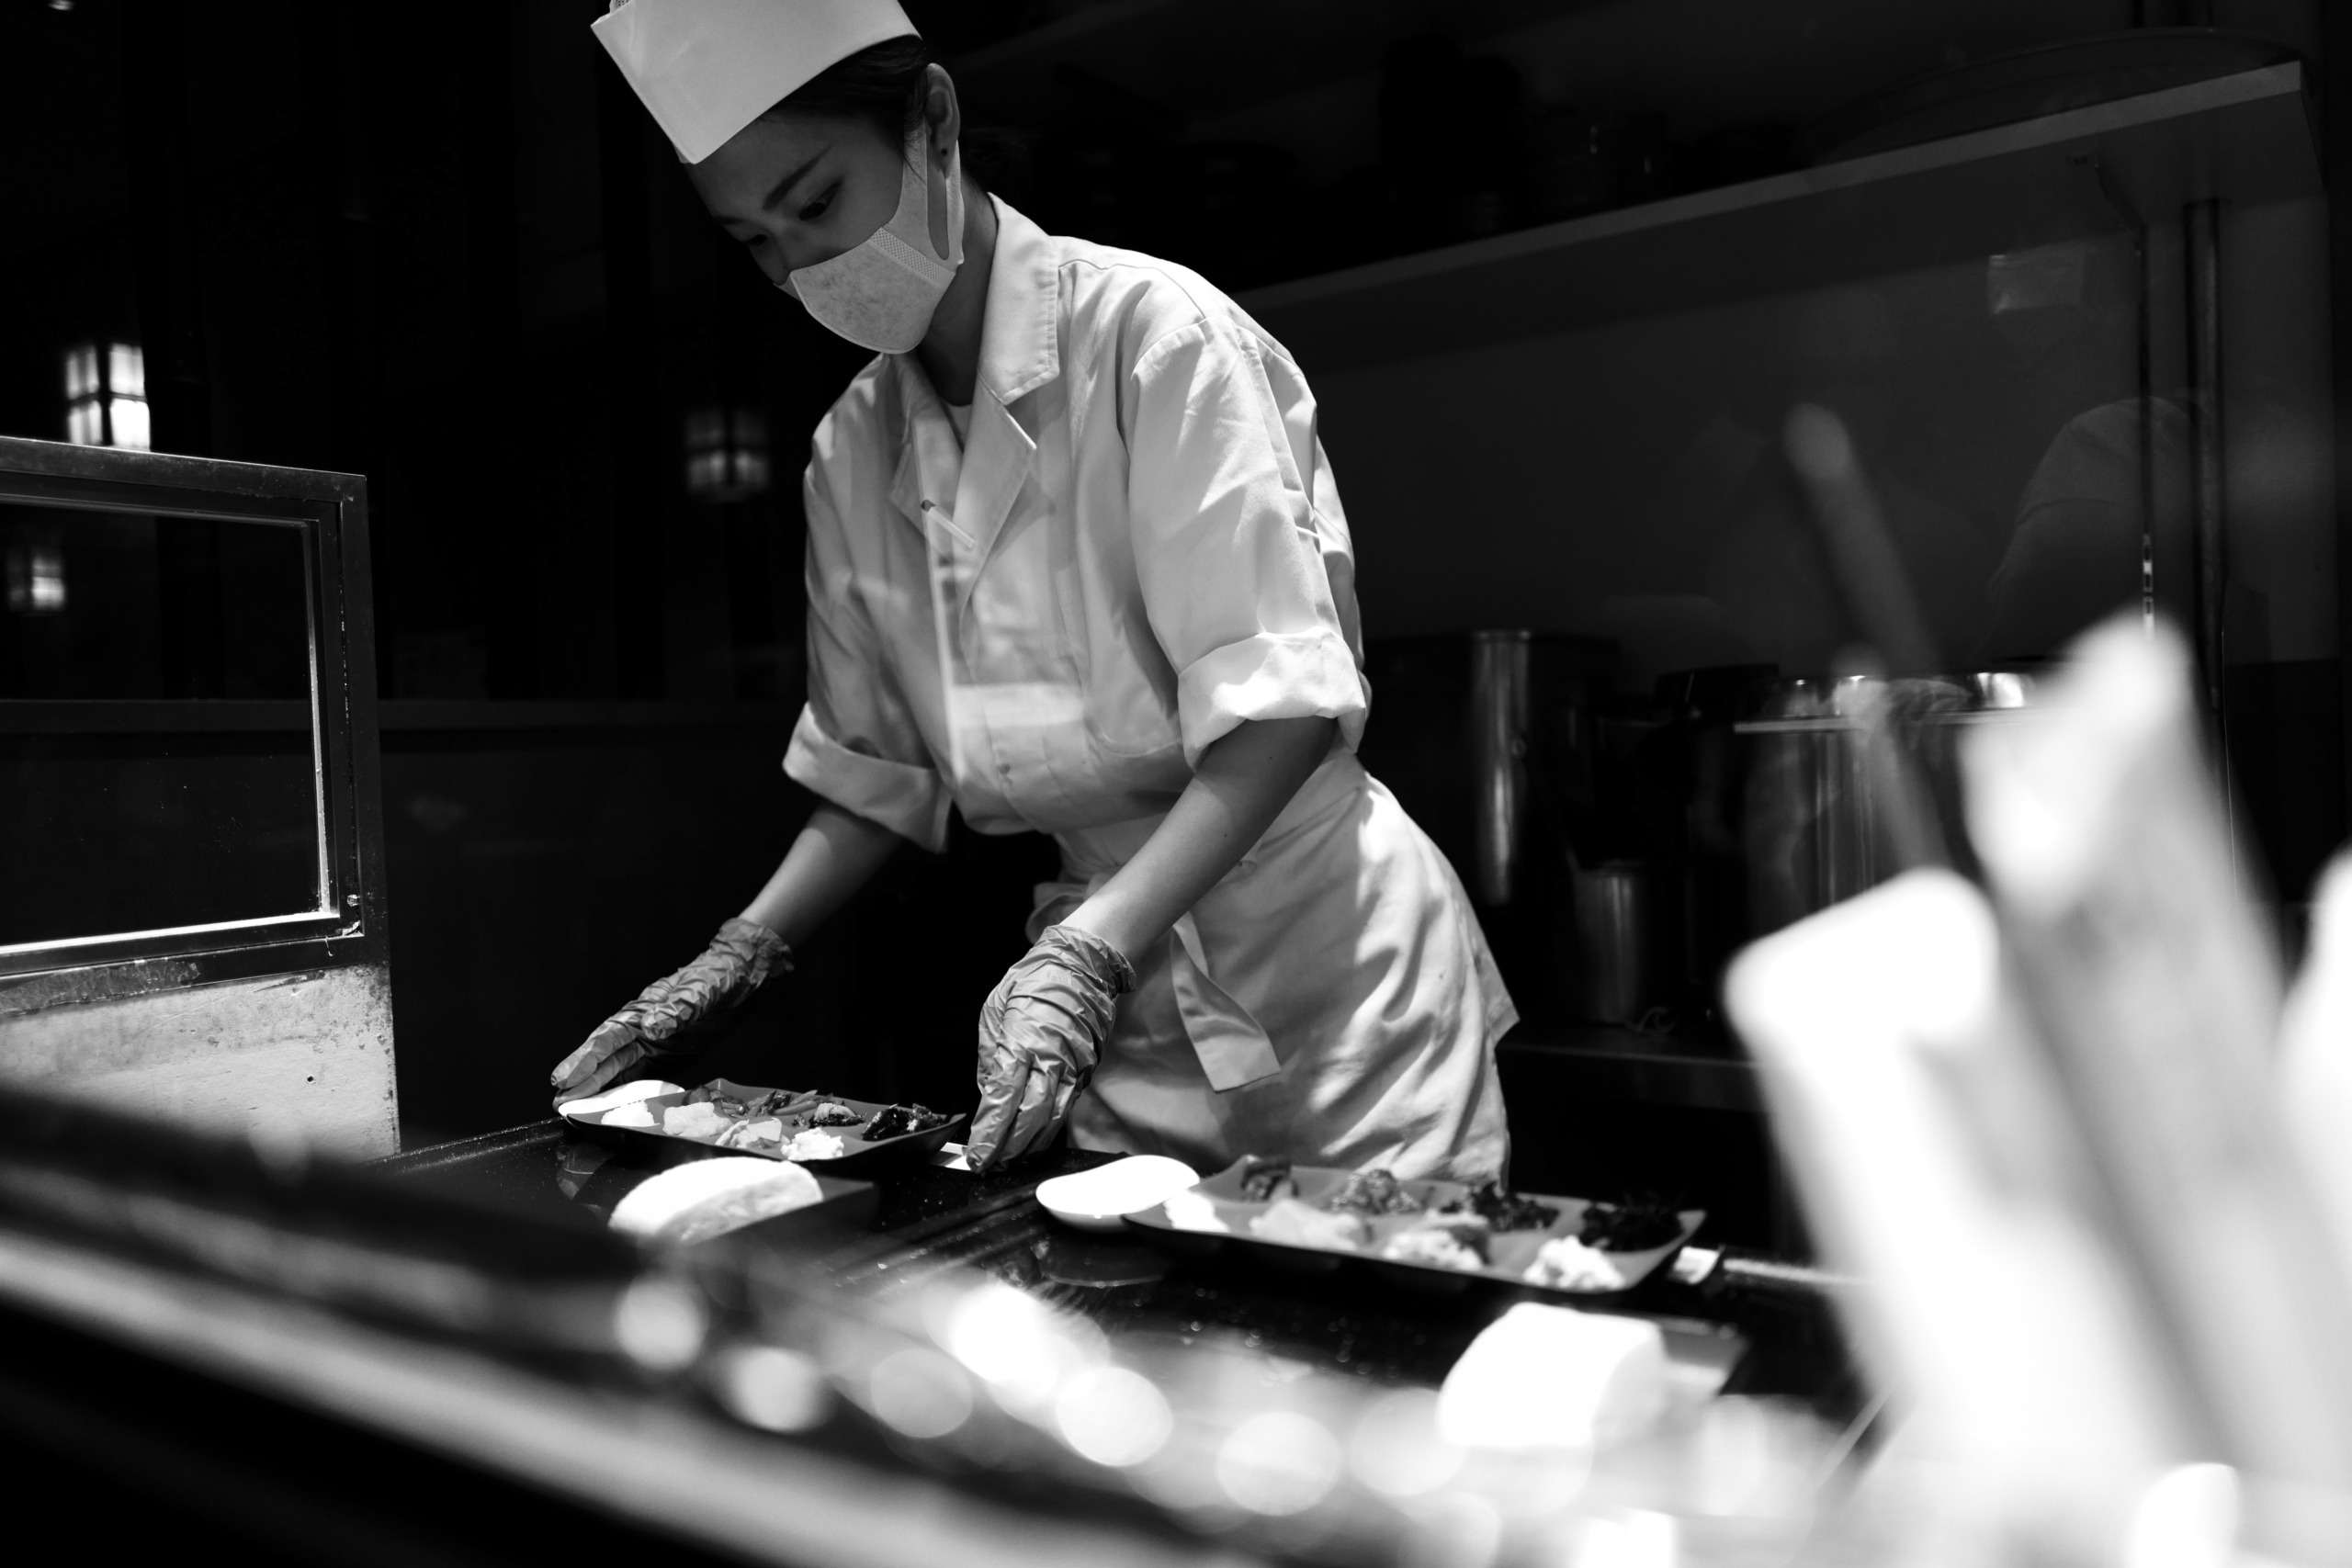 Women in the Kitchen: The unequal treatment of professional chefs in anime  and beyond - Anime Feminist